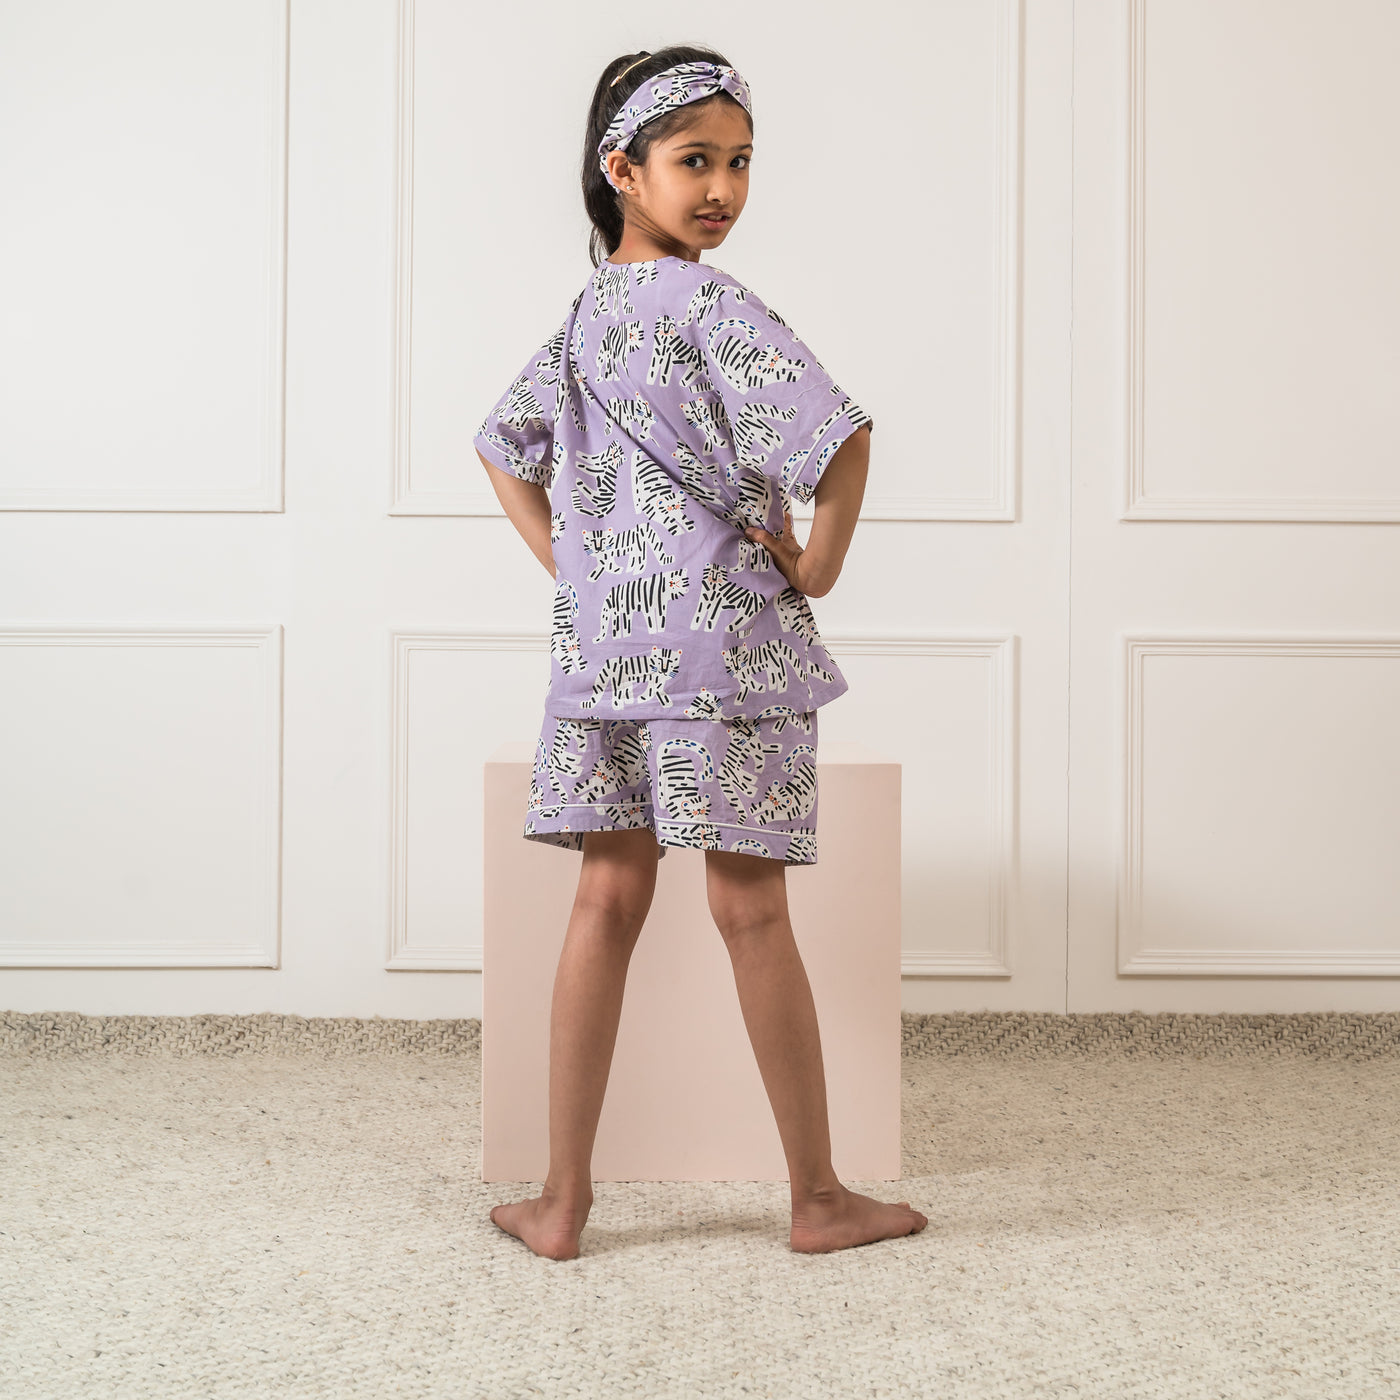 Eye of the Tiger - Lilac Organic Cotton nightsuit